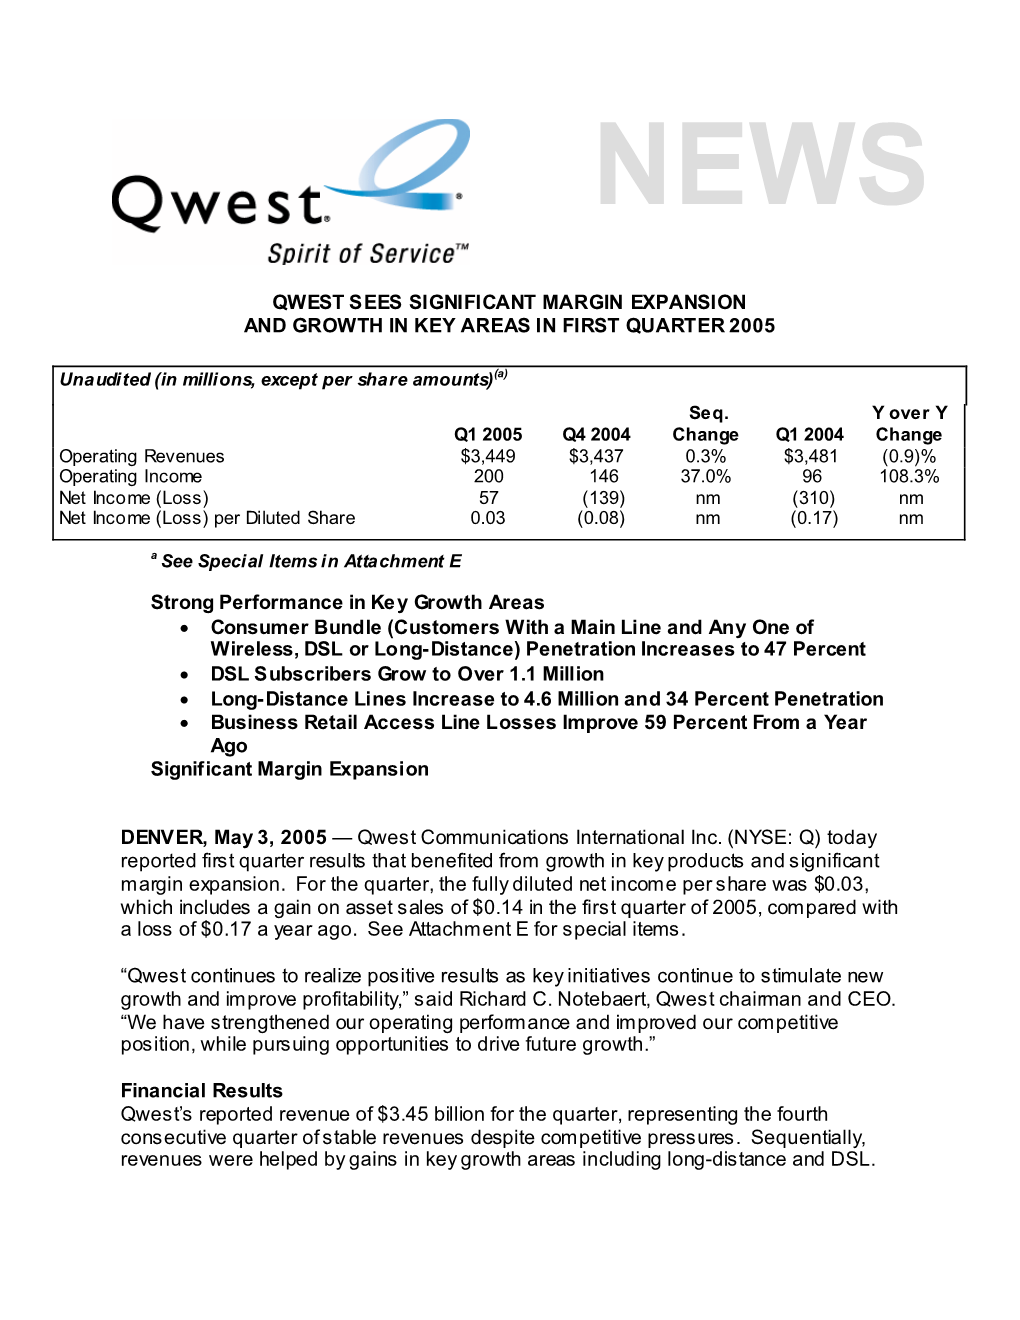 Qwest Sees Significant Margin Expansion and Growth in Key Areas in First Quarter 2005